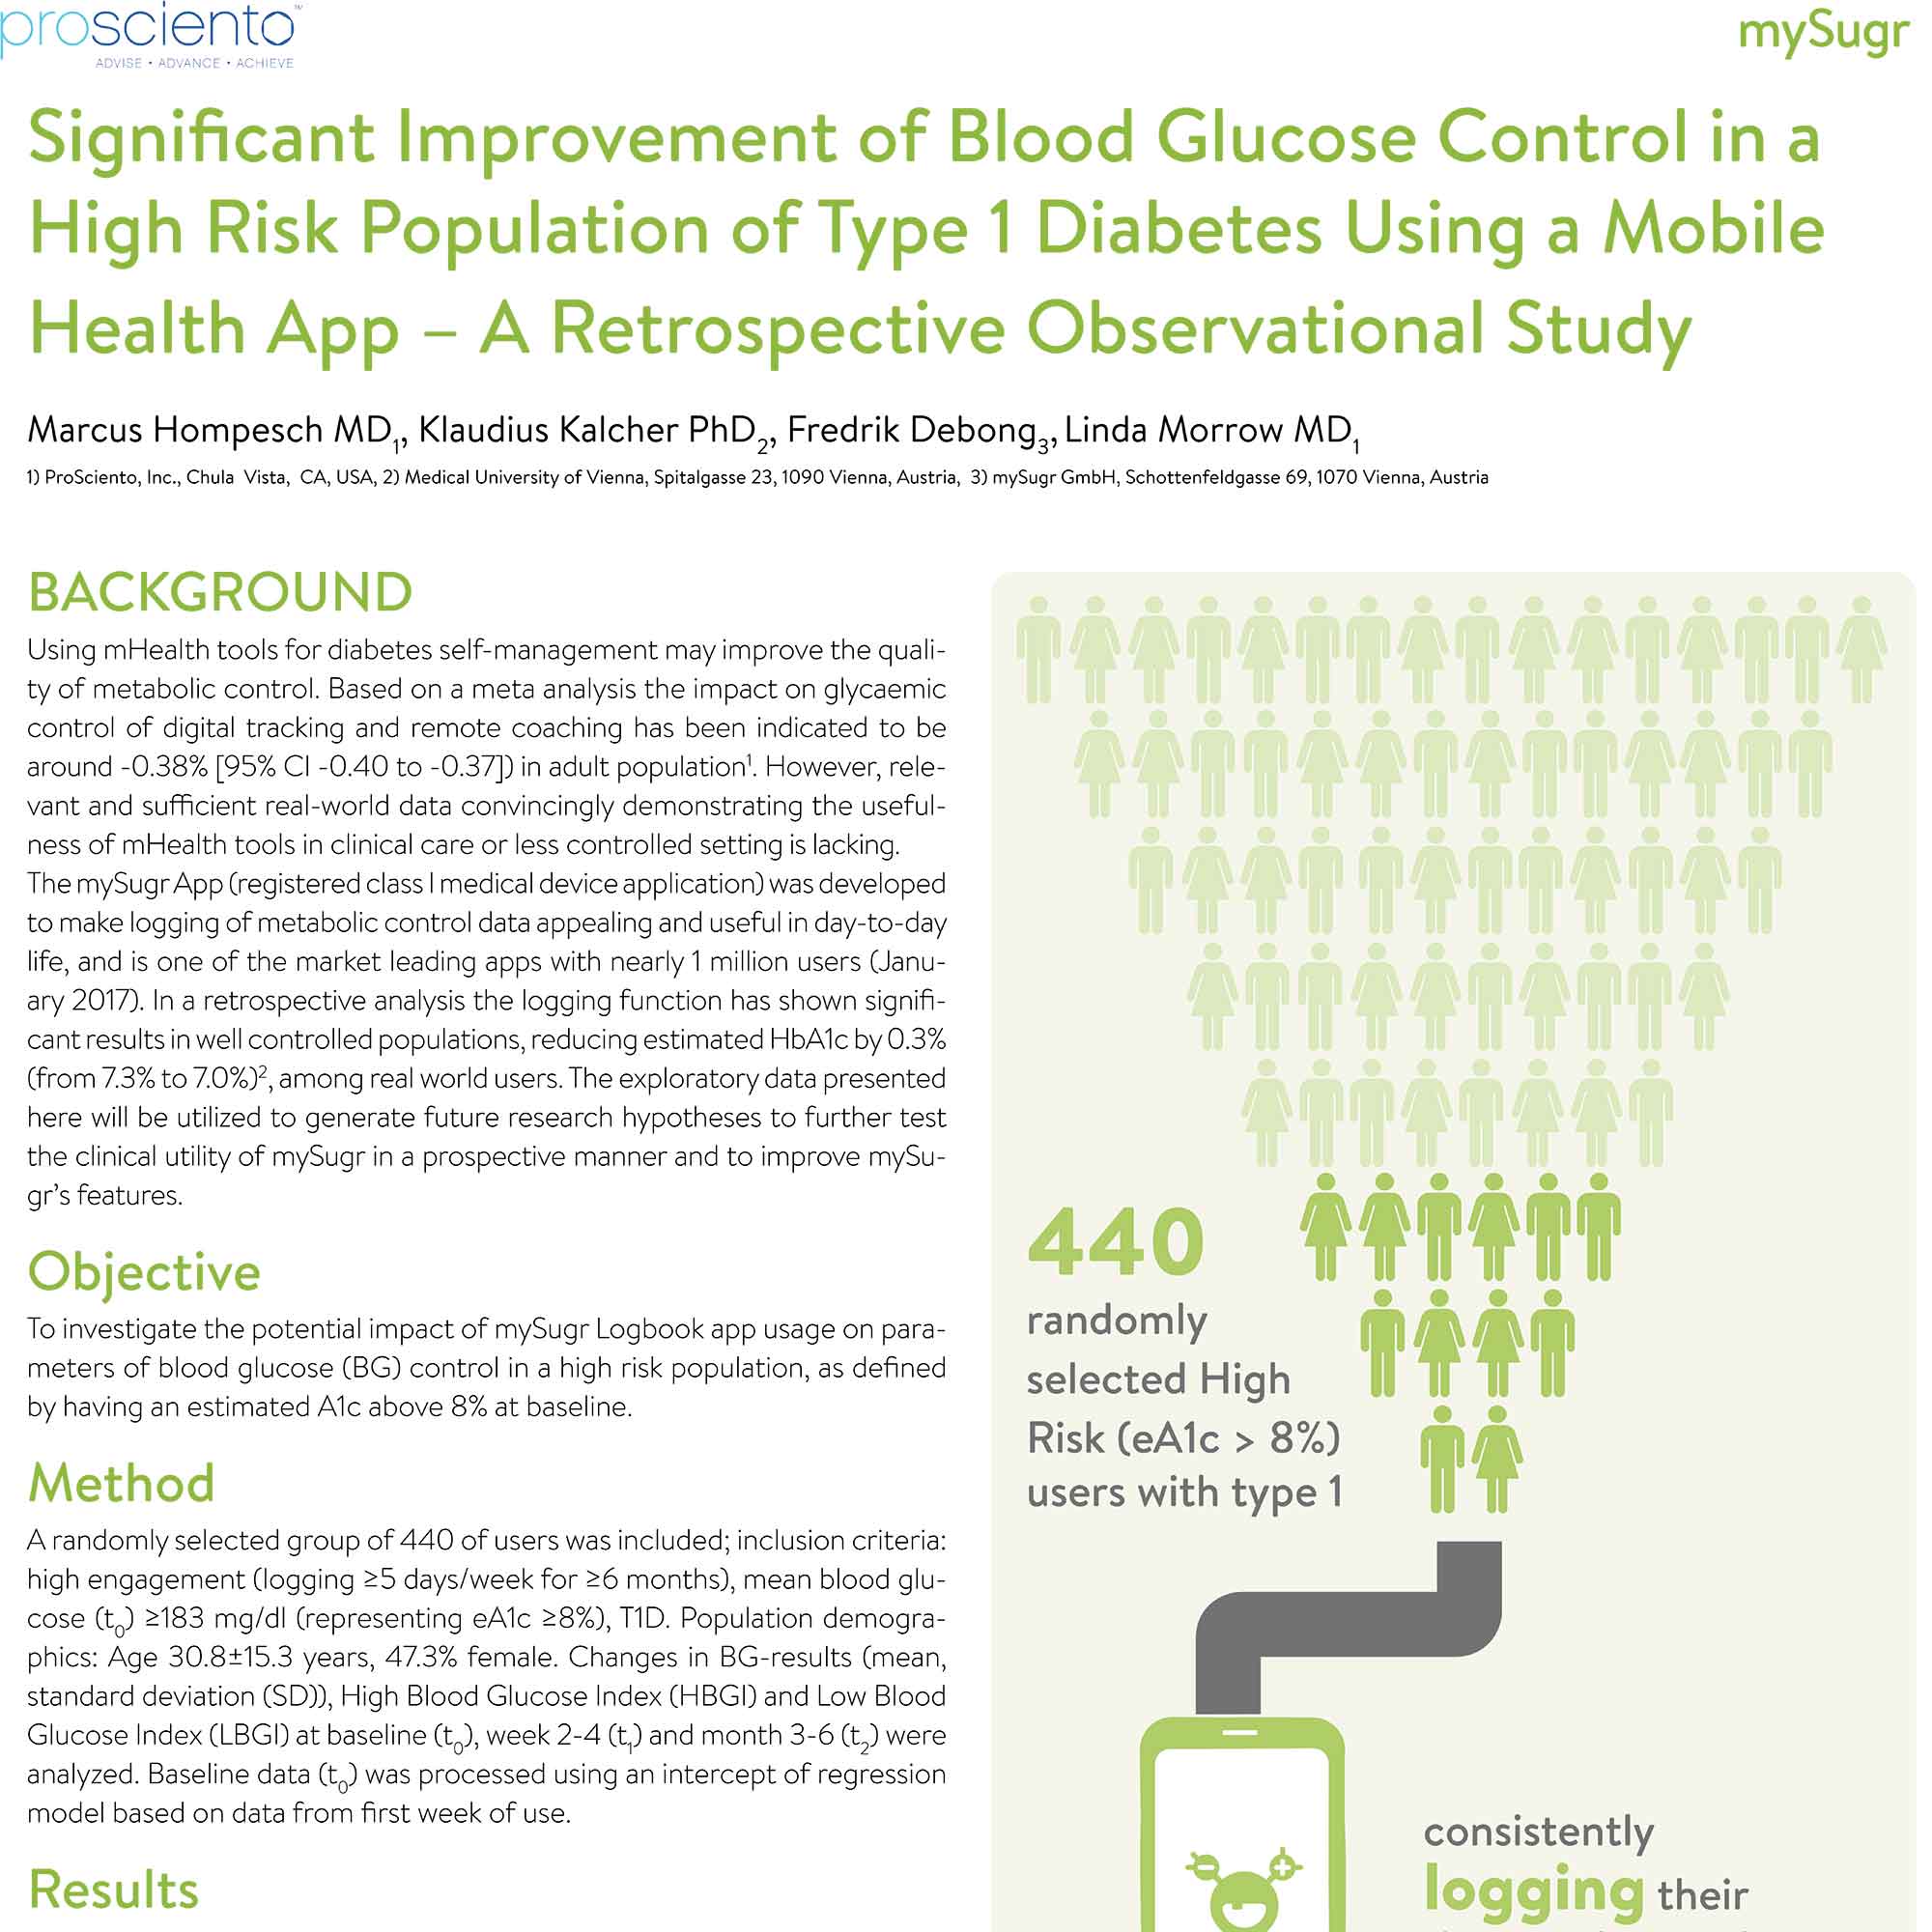 image of Significant Improvement of Blood Glucose Control in a High Risk Population of Type 1 Diabetes Using a Mobile Health App – A Retrospective Observational Study